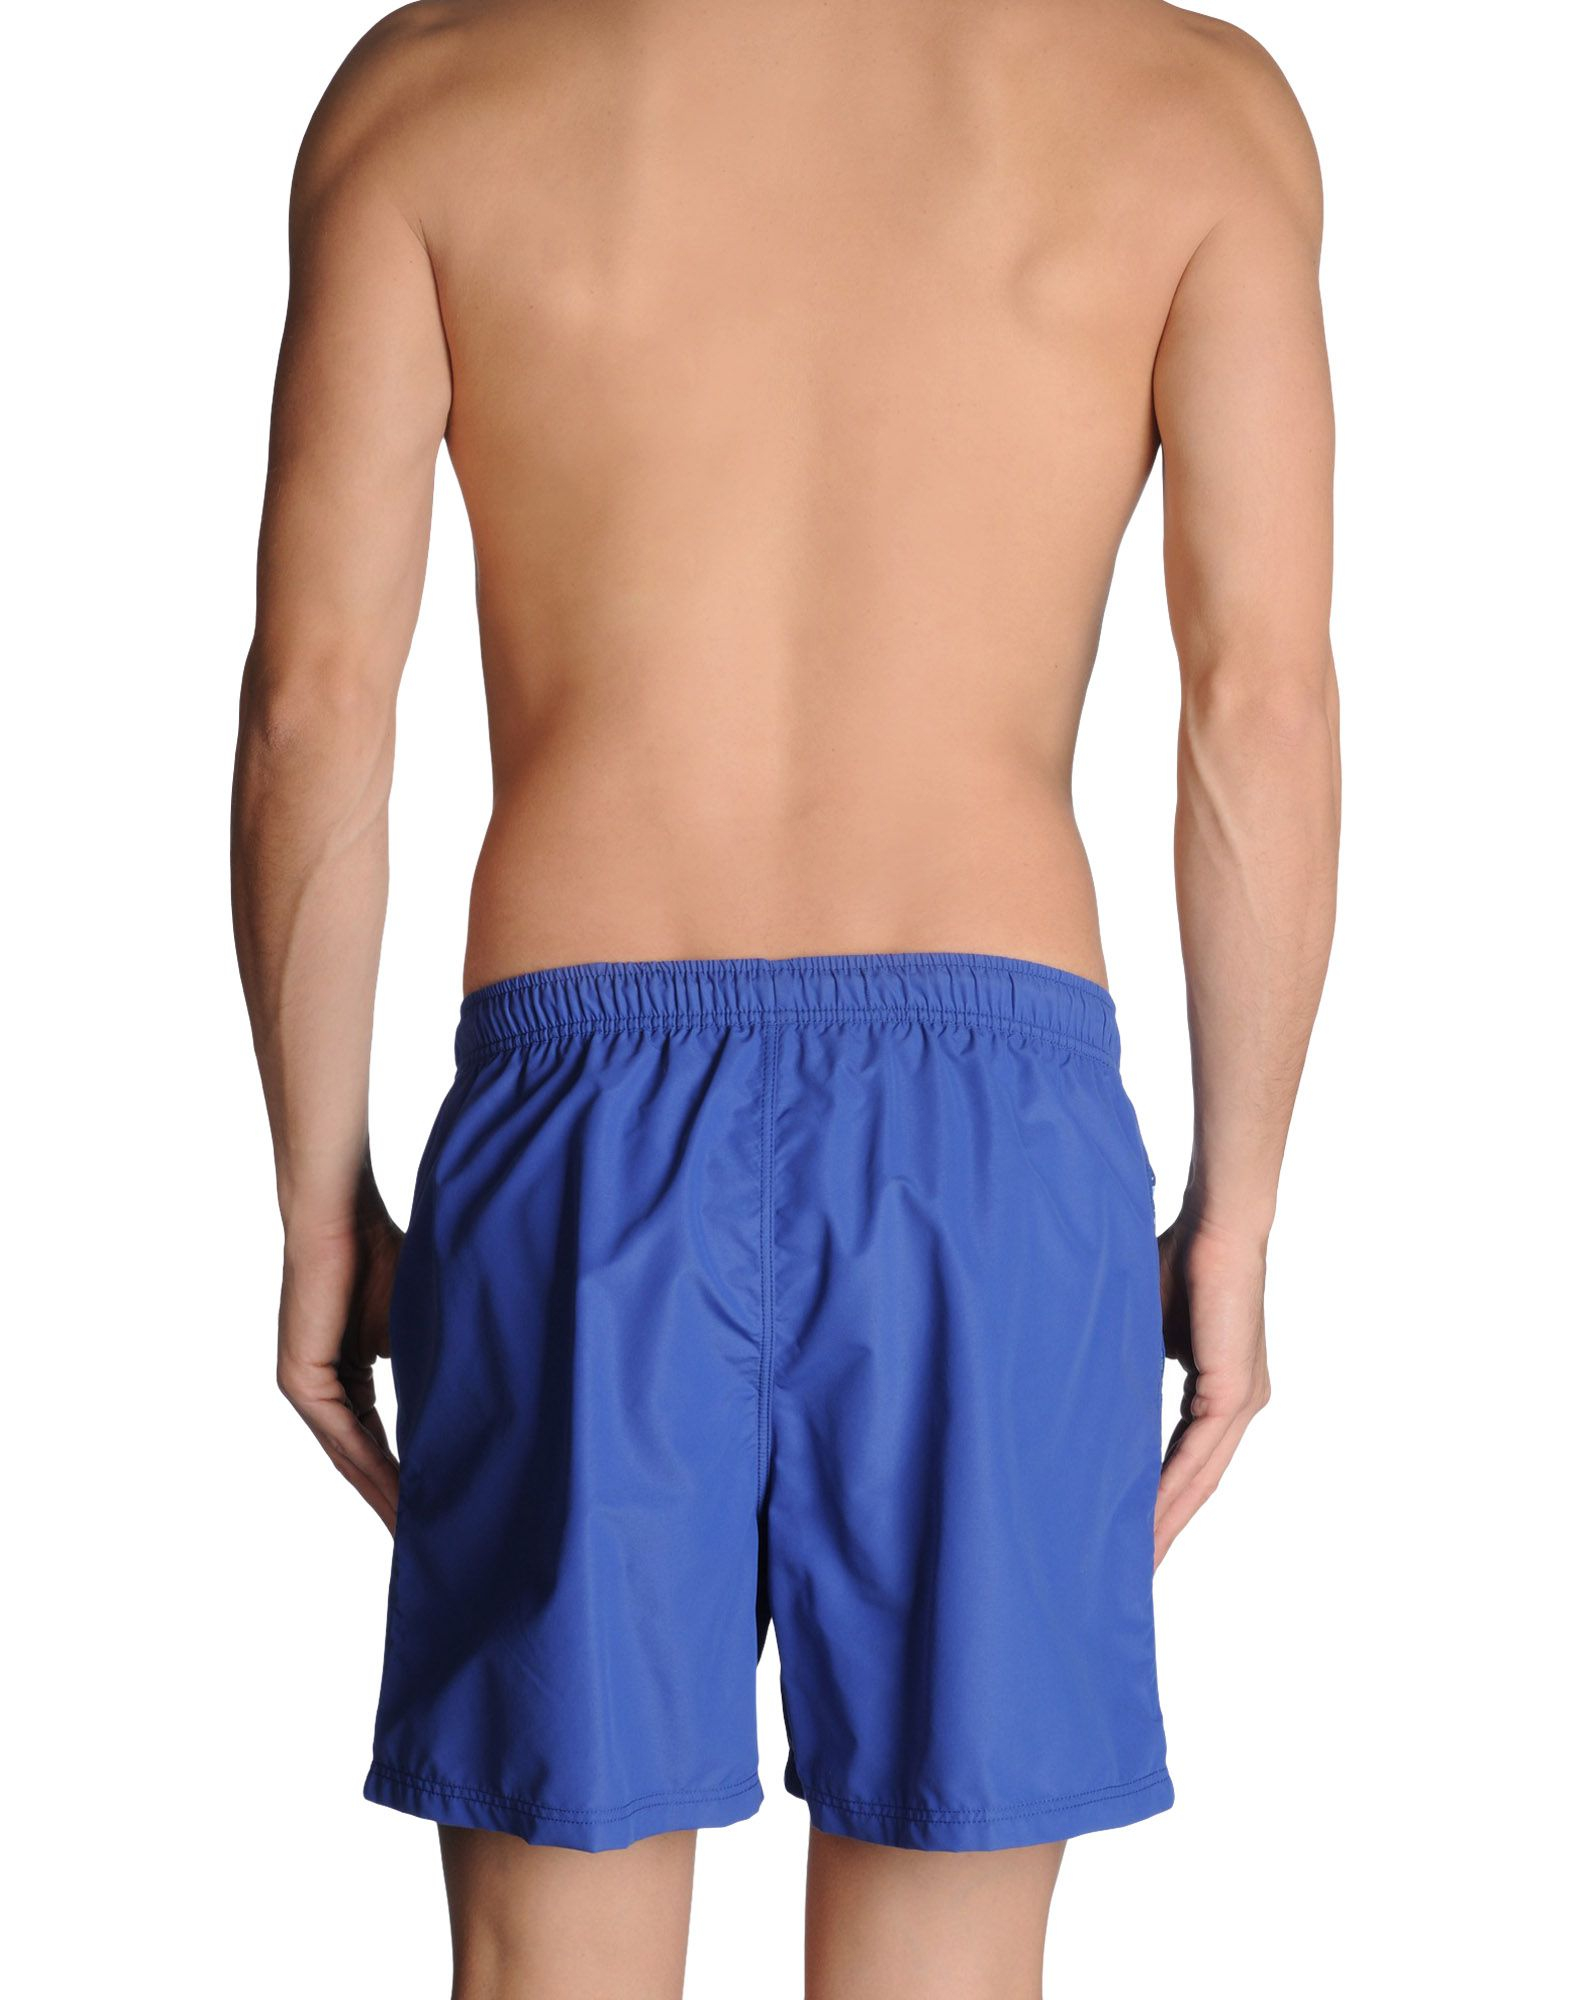 Lyst - Etro Swimming Trunk in Blue for Men